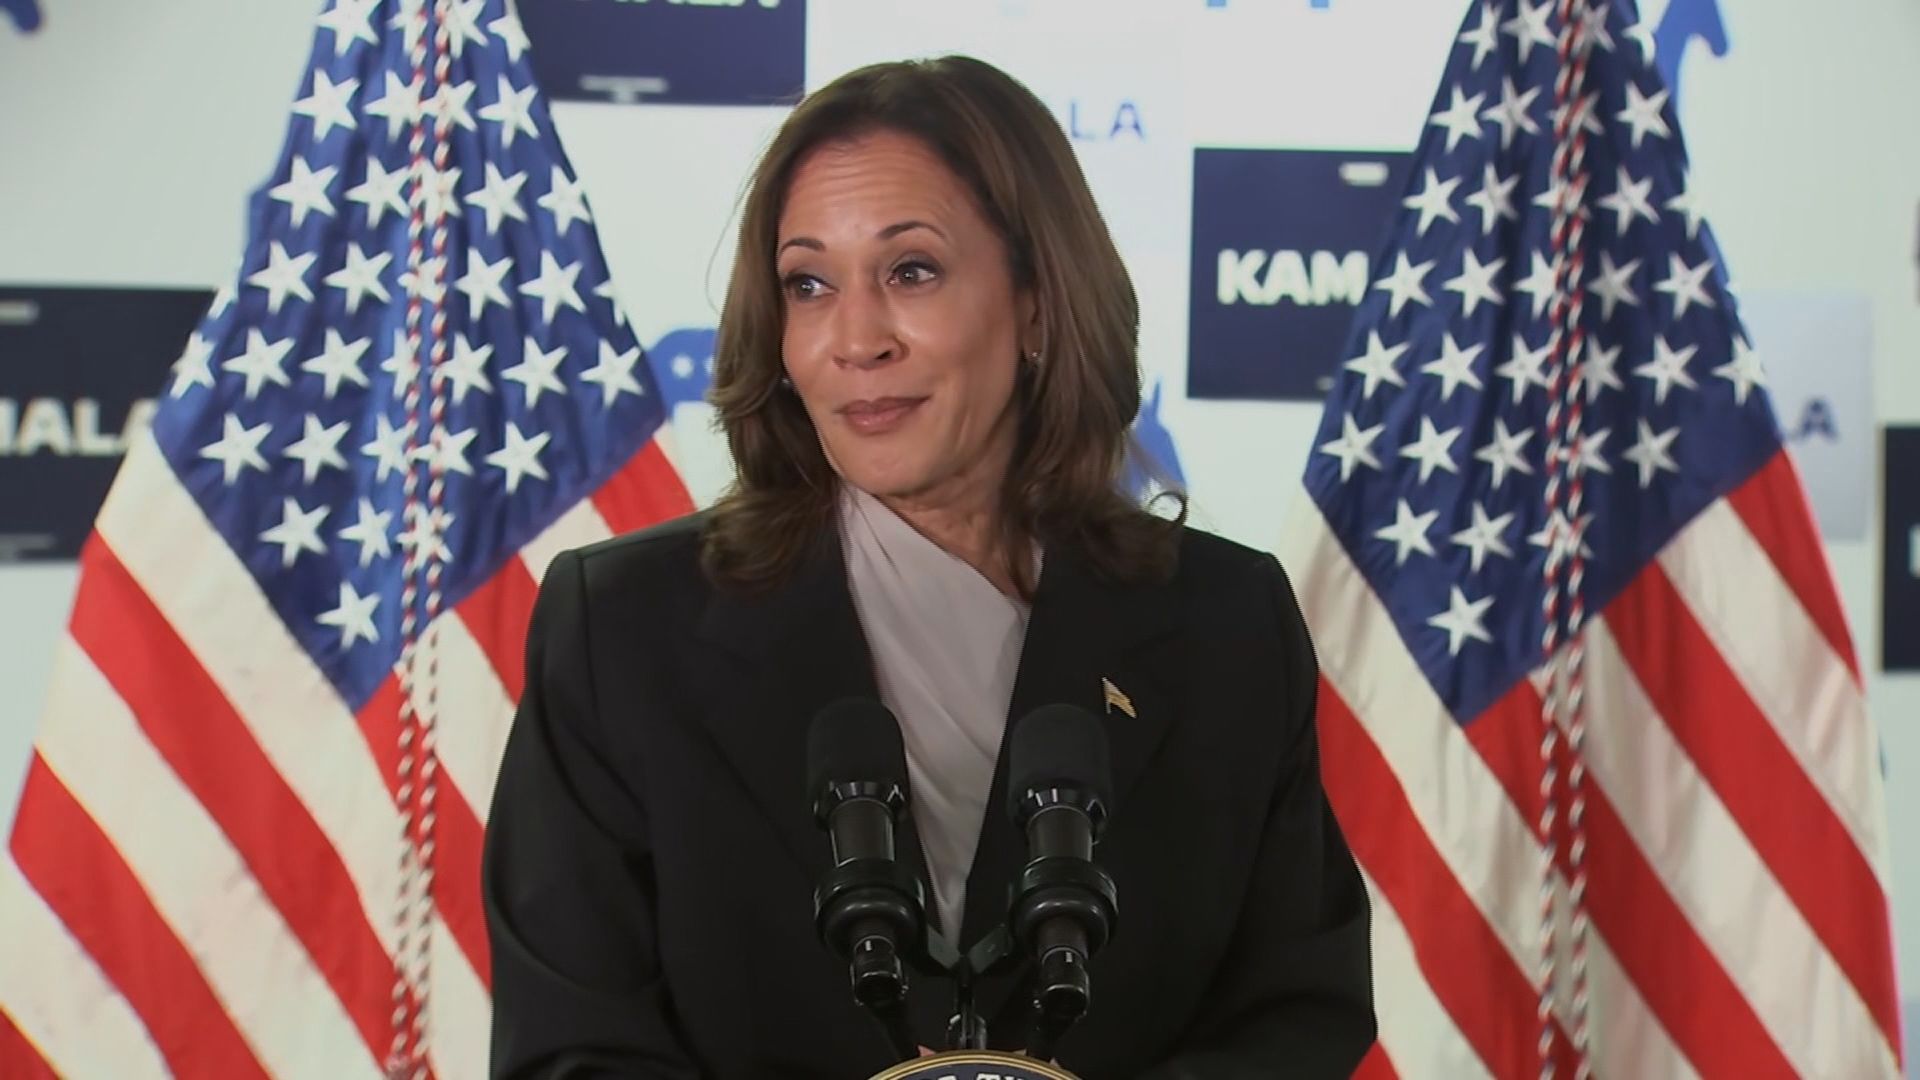 Erie Democratic Party Hosts Kick-Off Event in Support of Kamala Harris